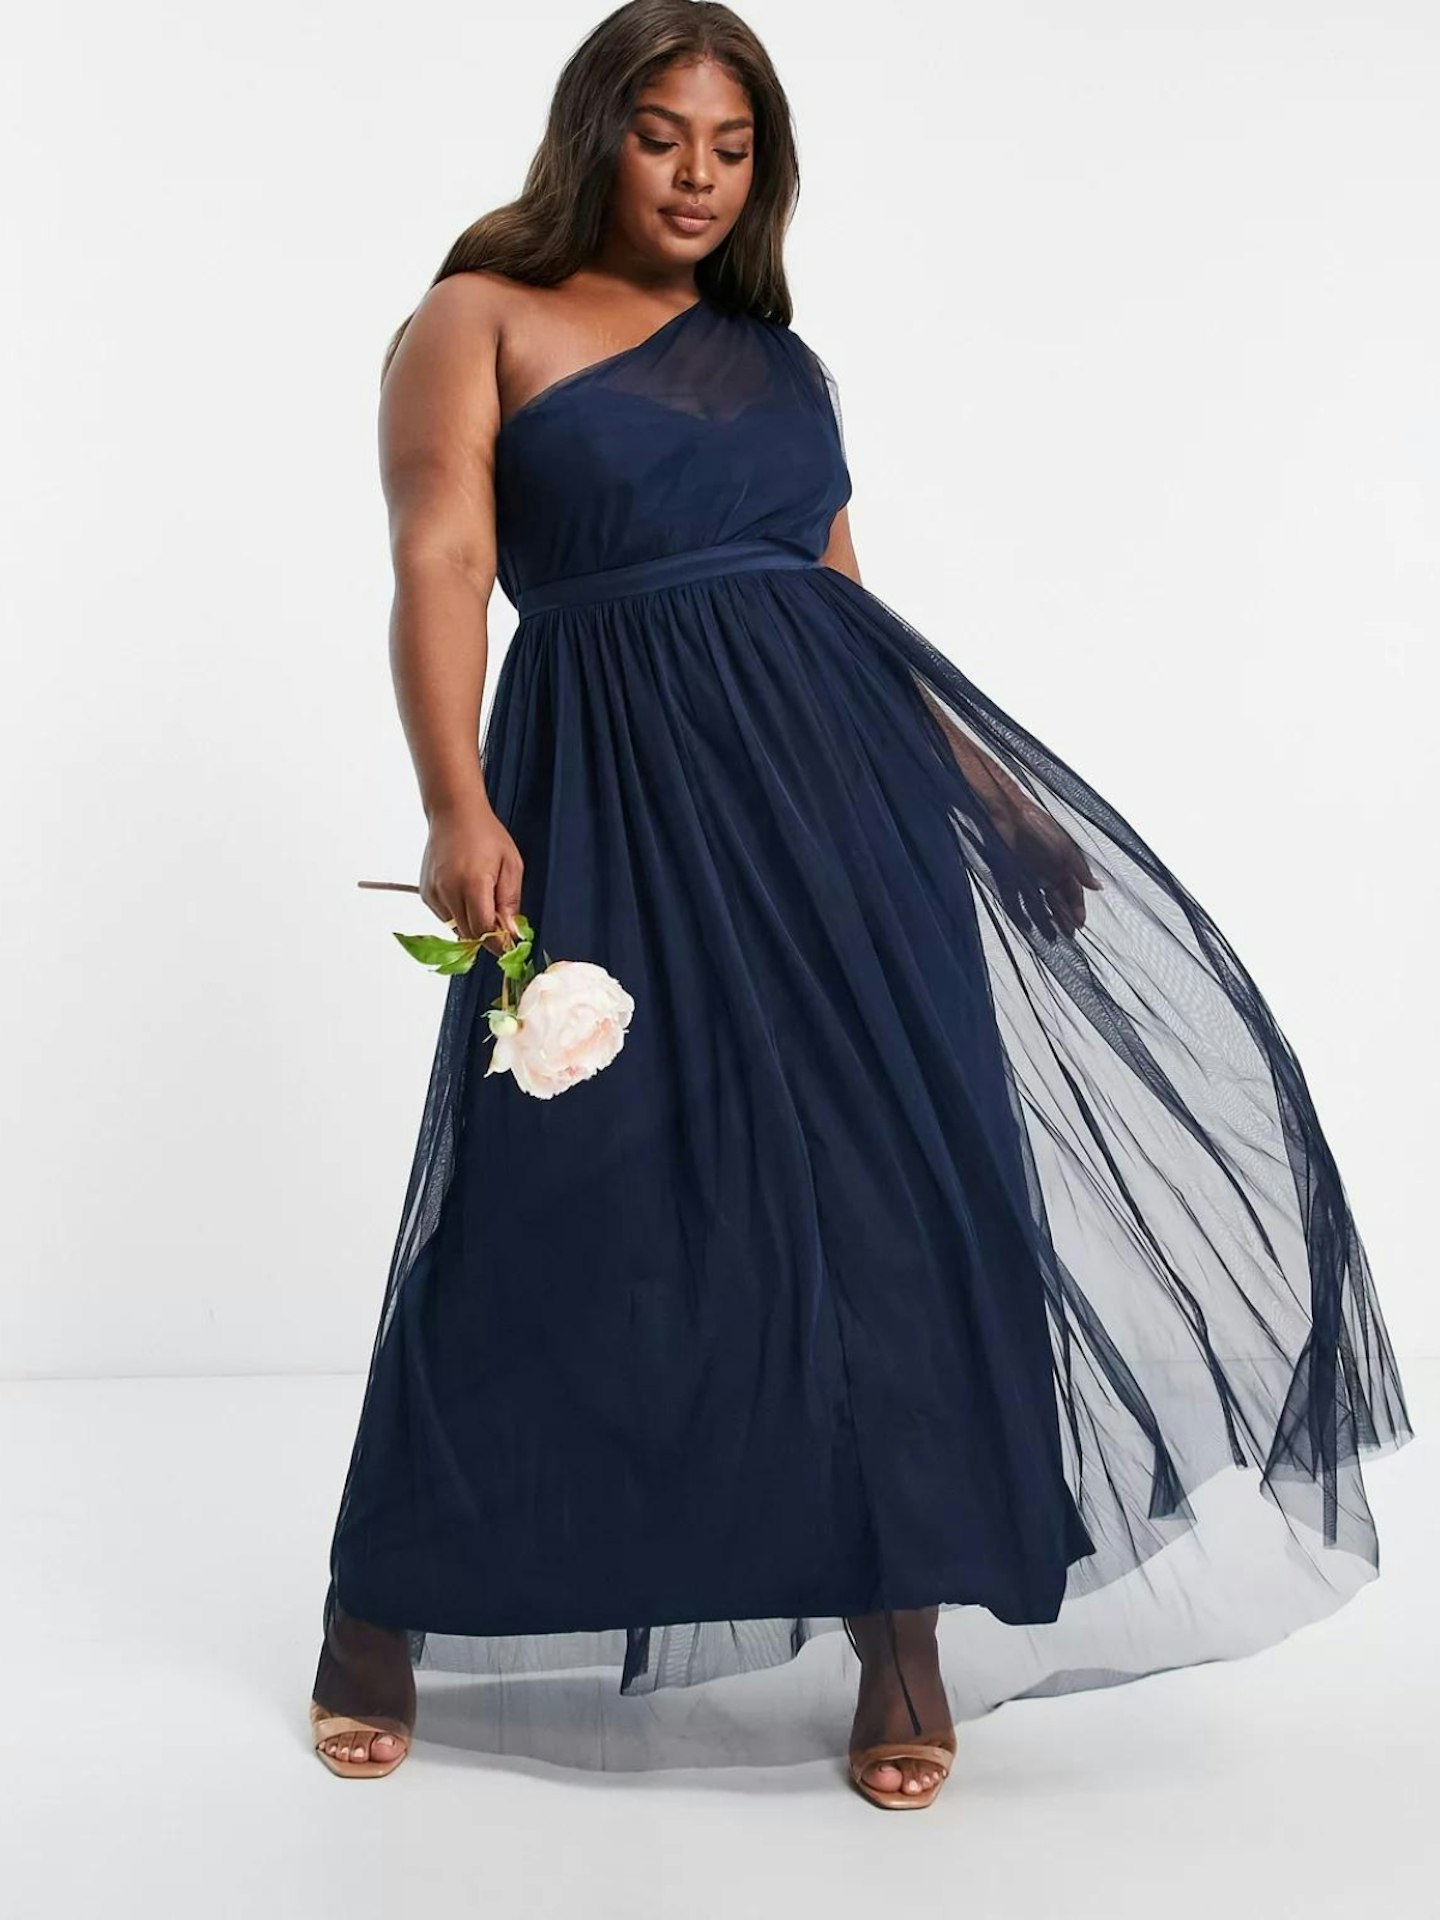 Anaya With Love Plus Bridesmaid tulle one shoulder maxi dress in navy